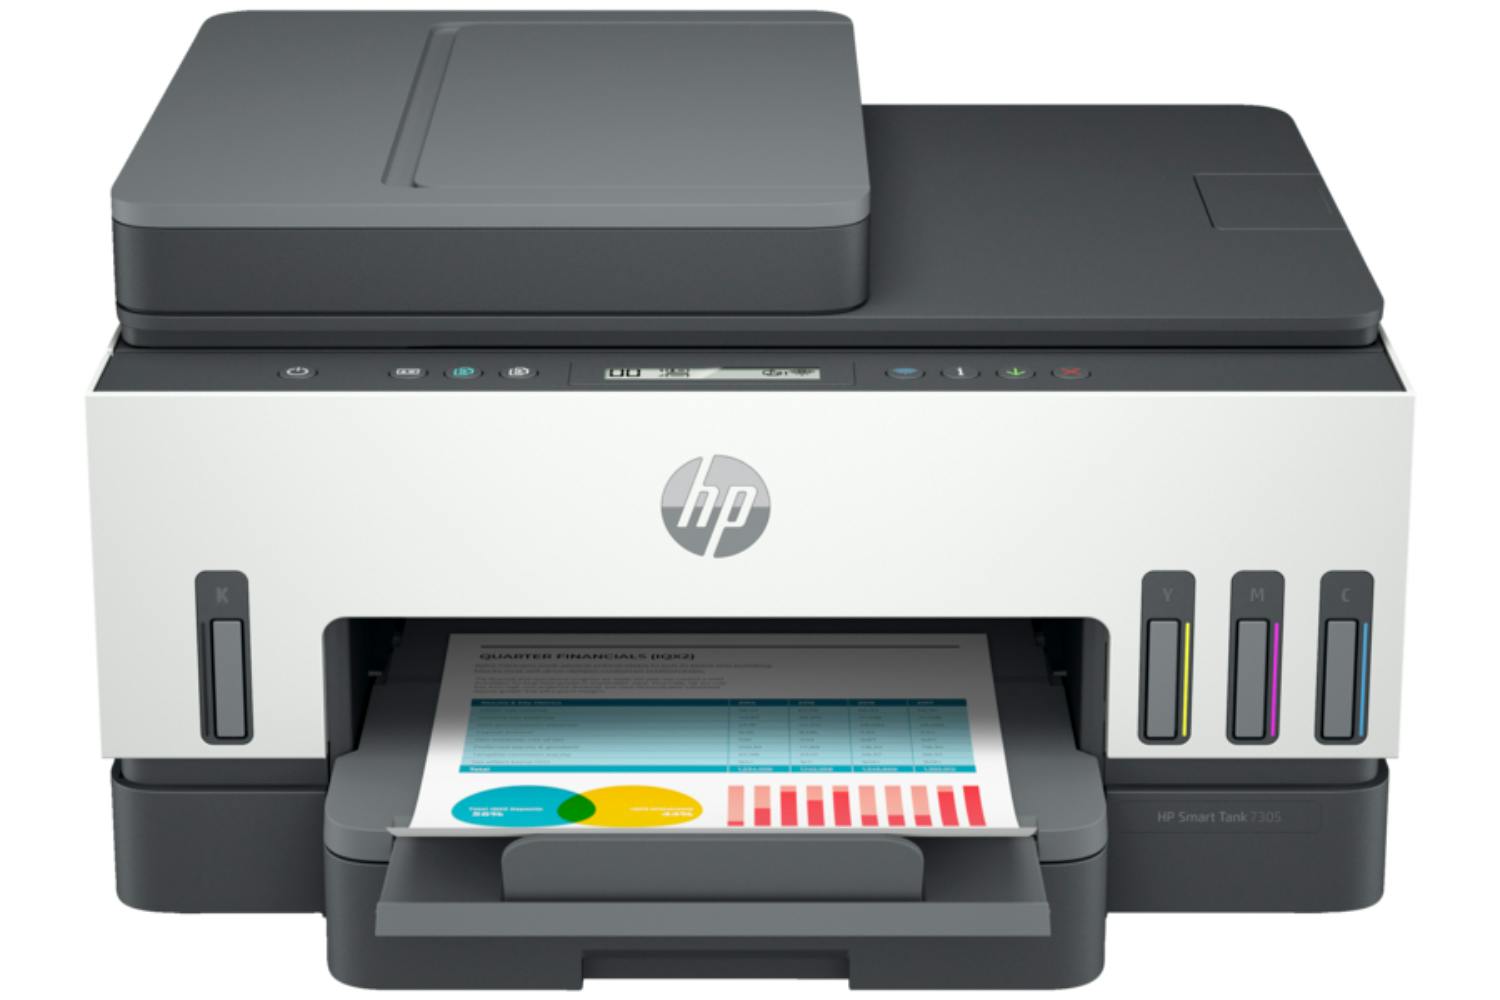 HP Smart Tank 7305 All-in-One Wireless Colour Printer